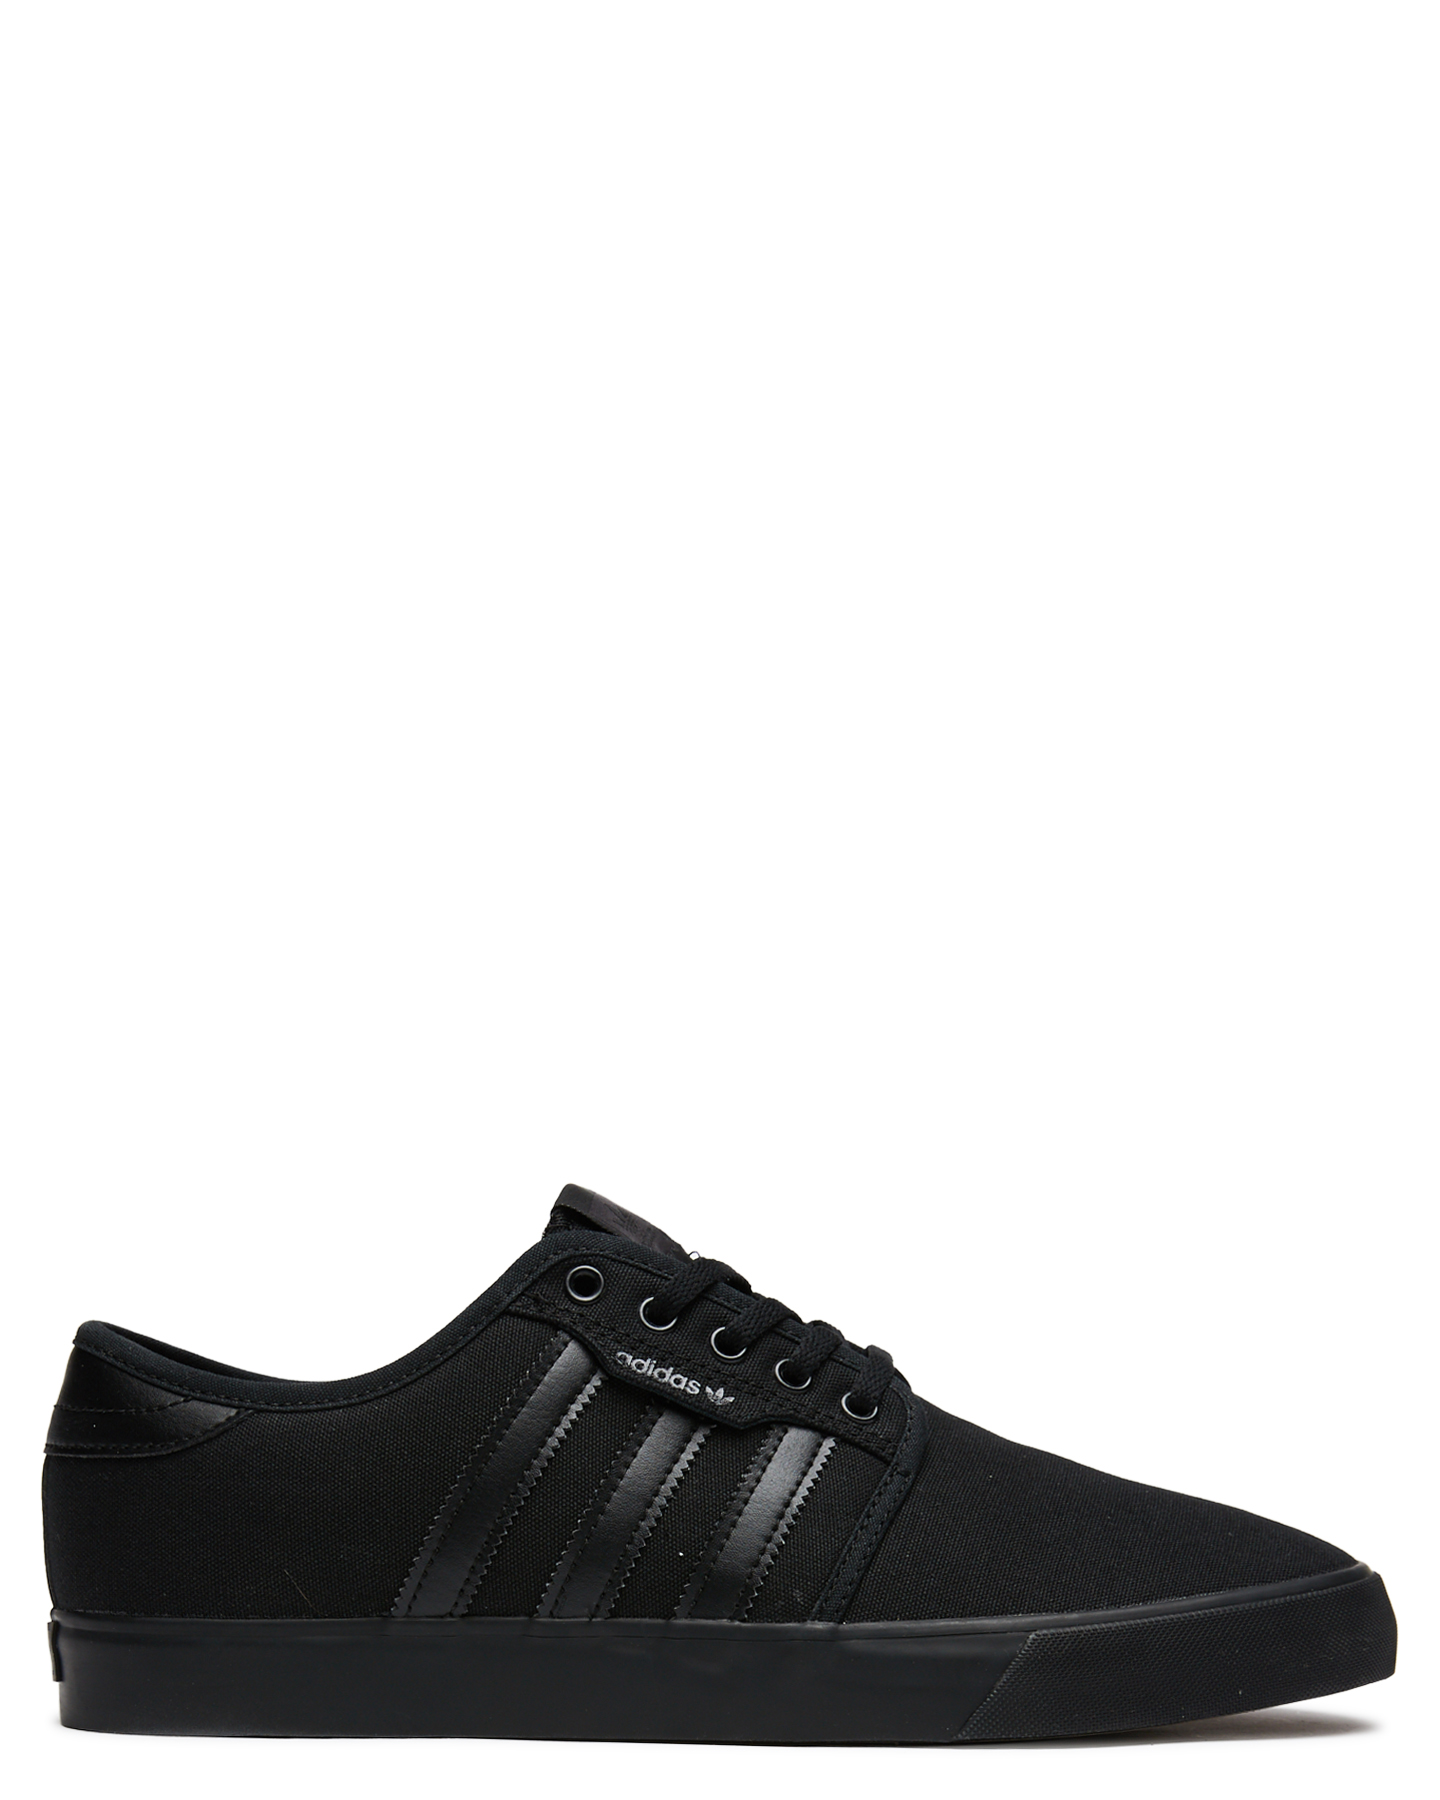 leather adidas womens shoes